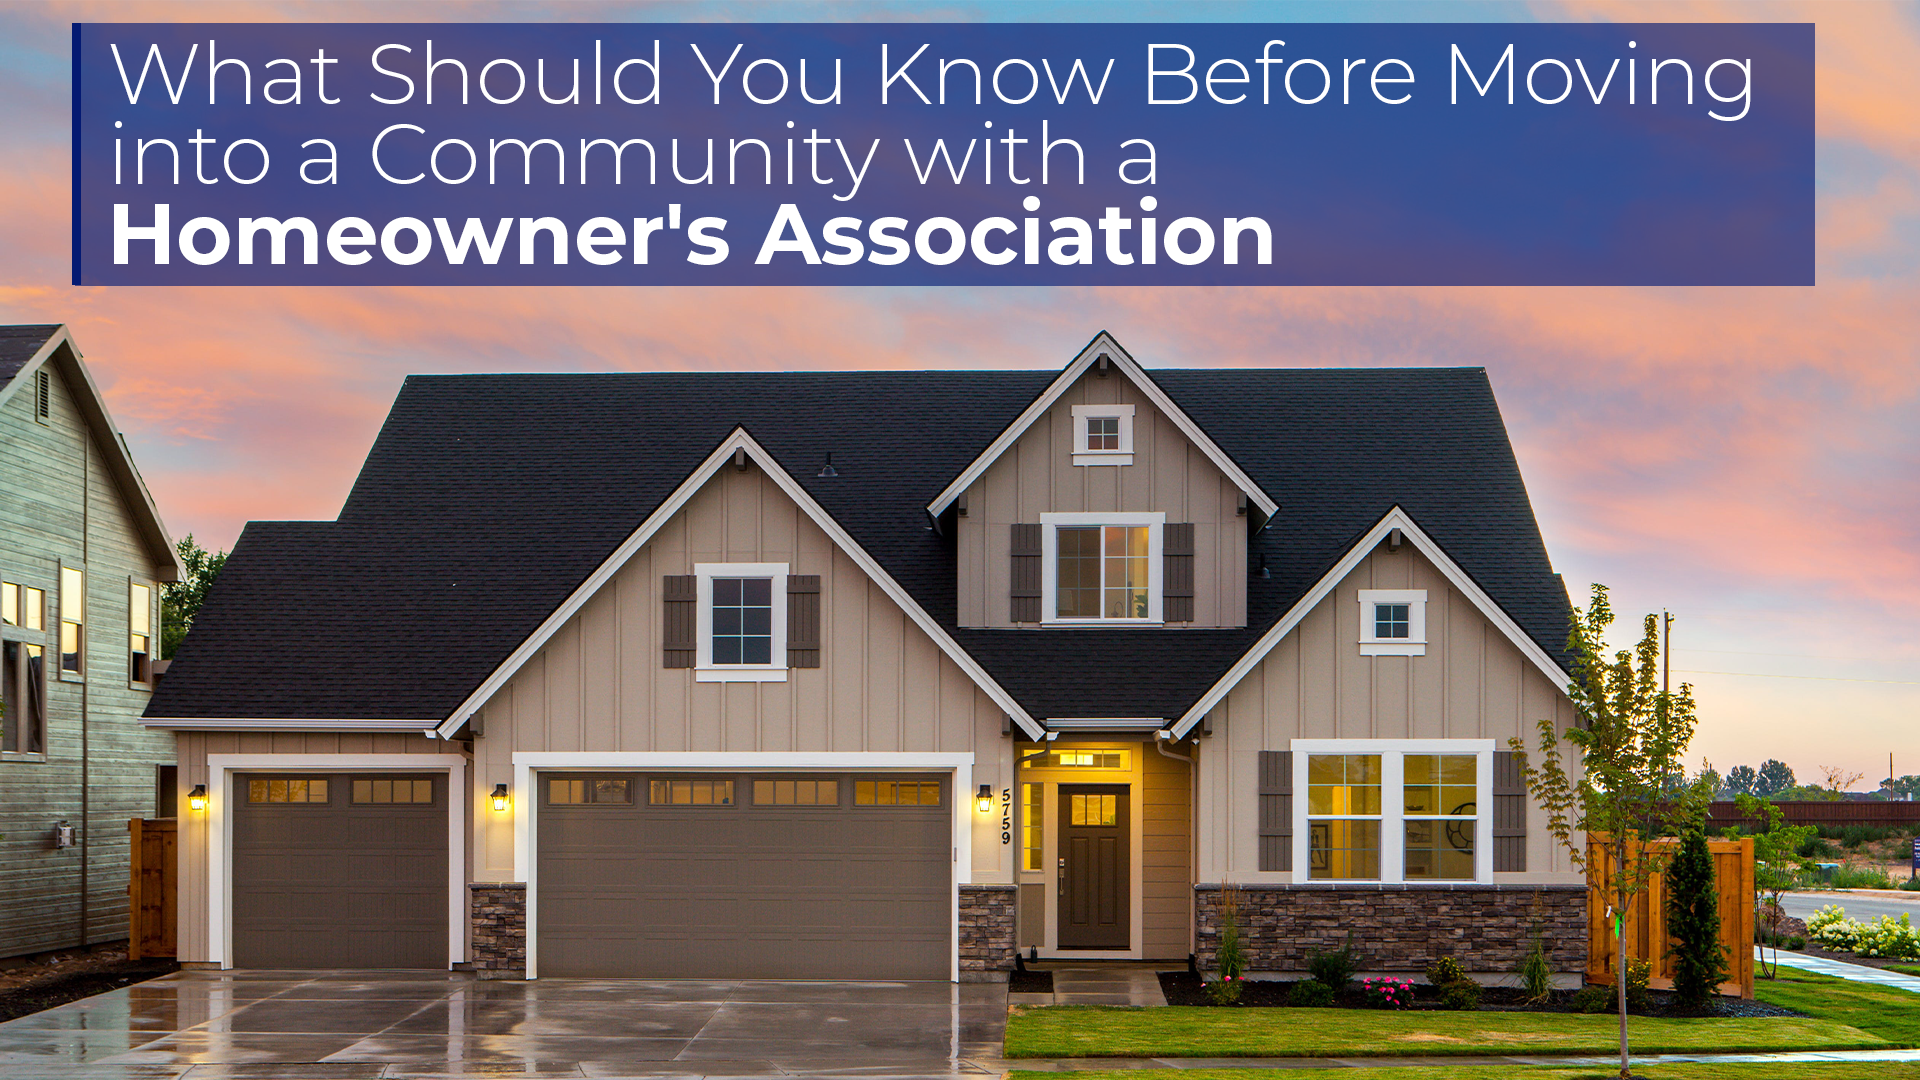 What Should You Know Before Moving into a Community with a Homeowner's Association (HOA)? 